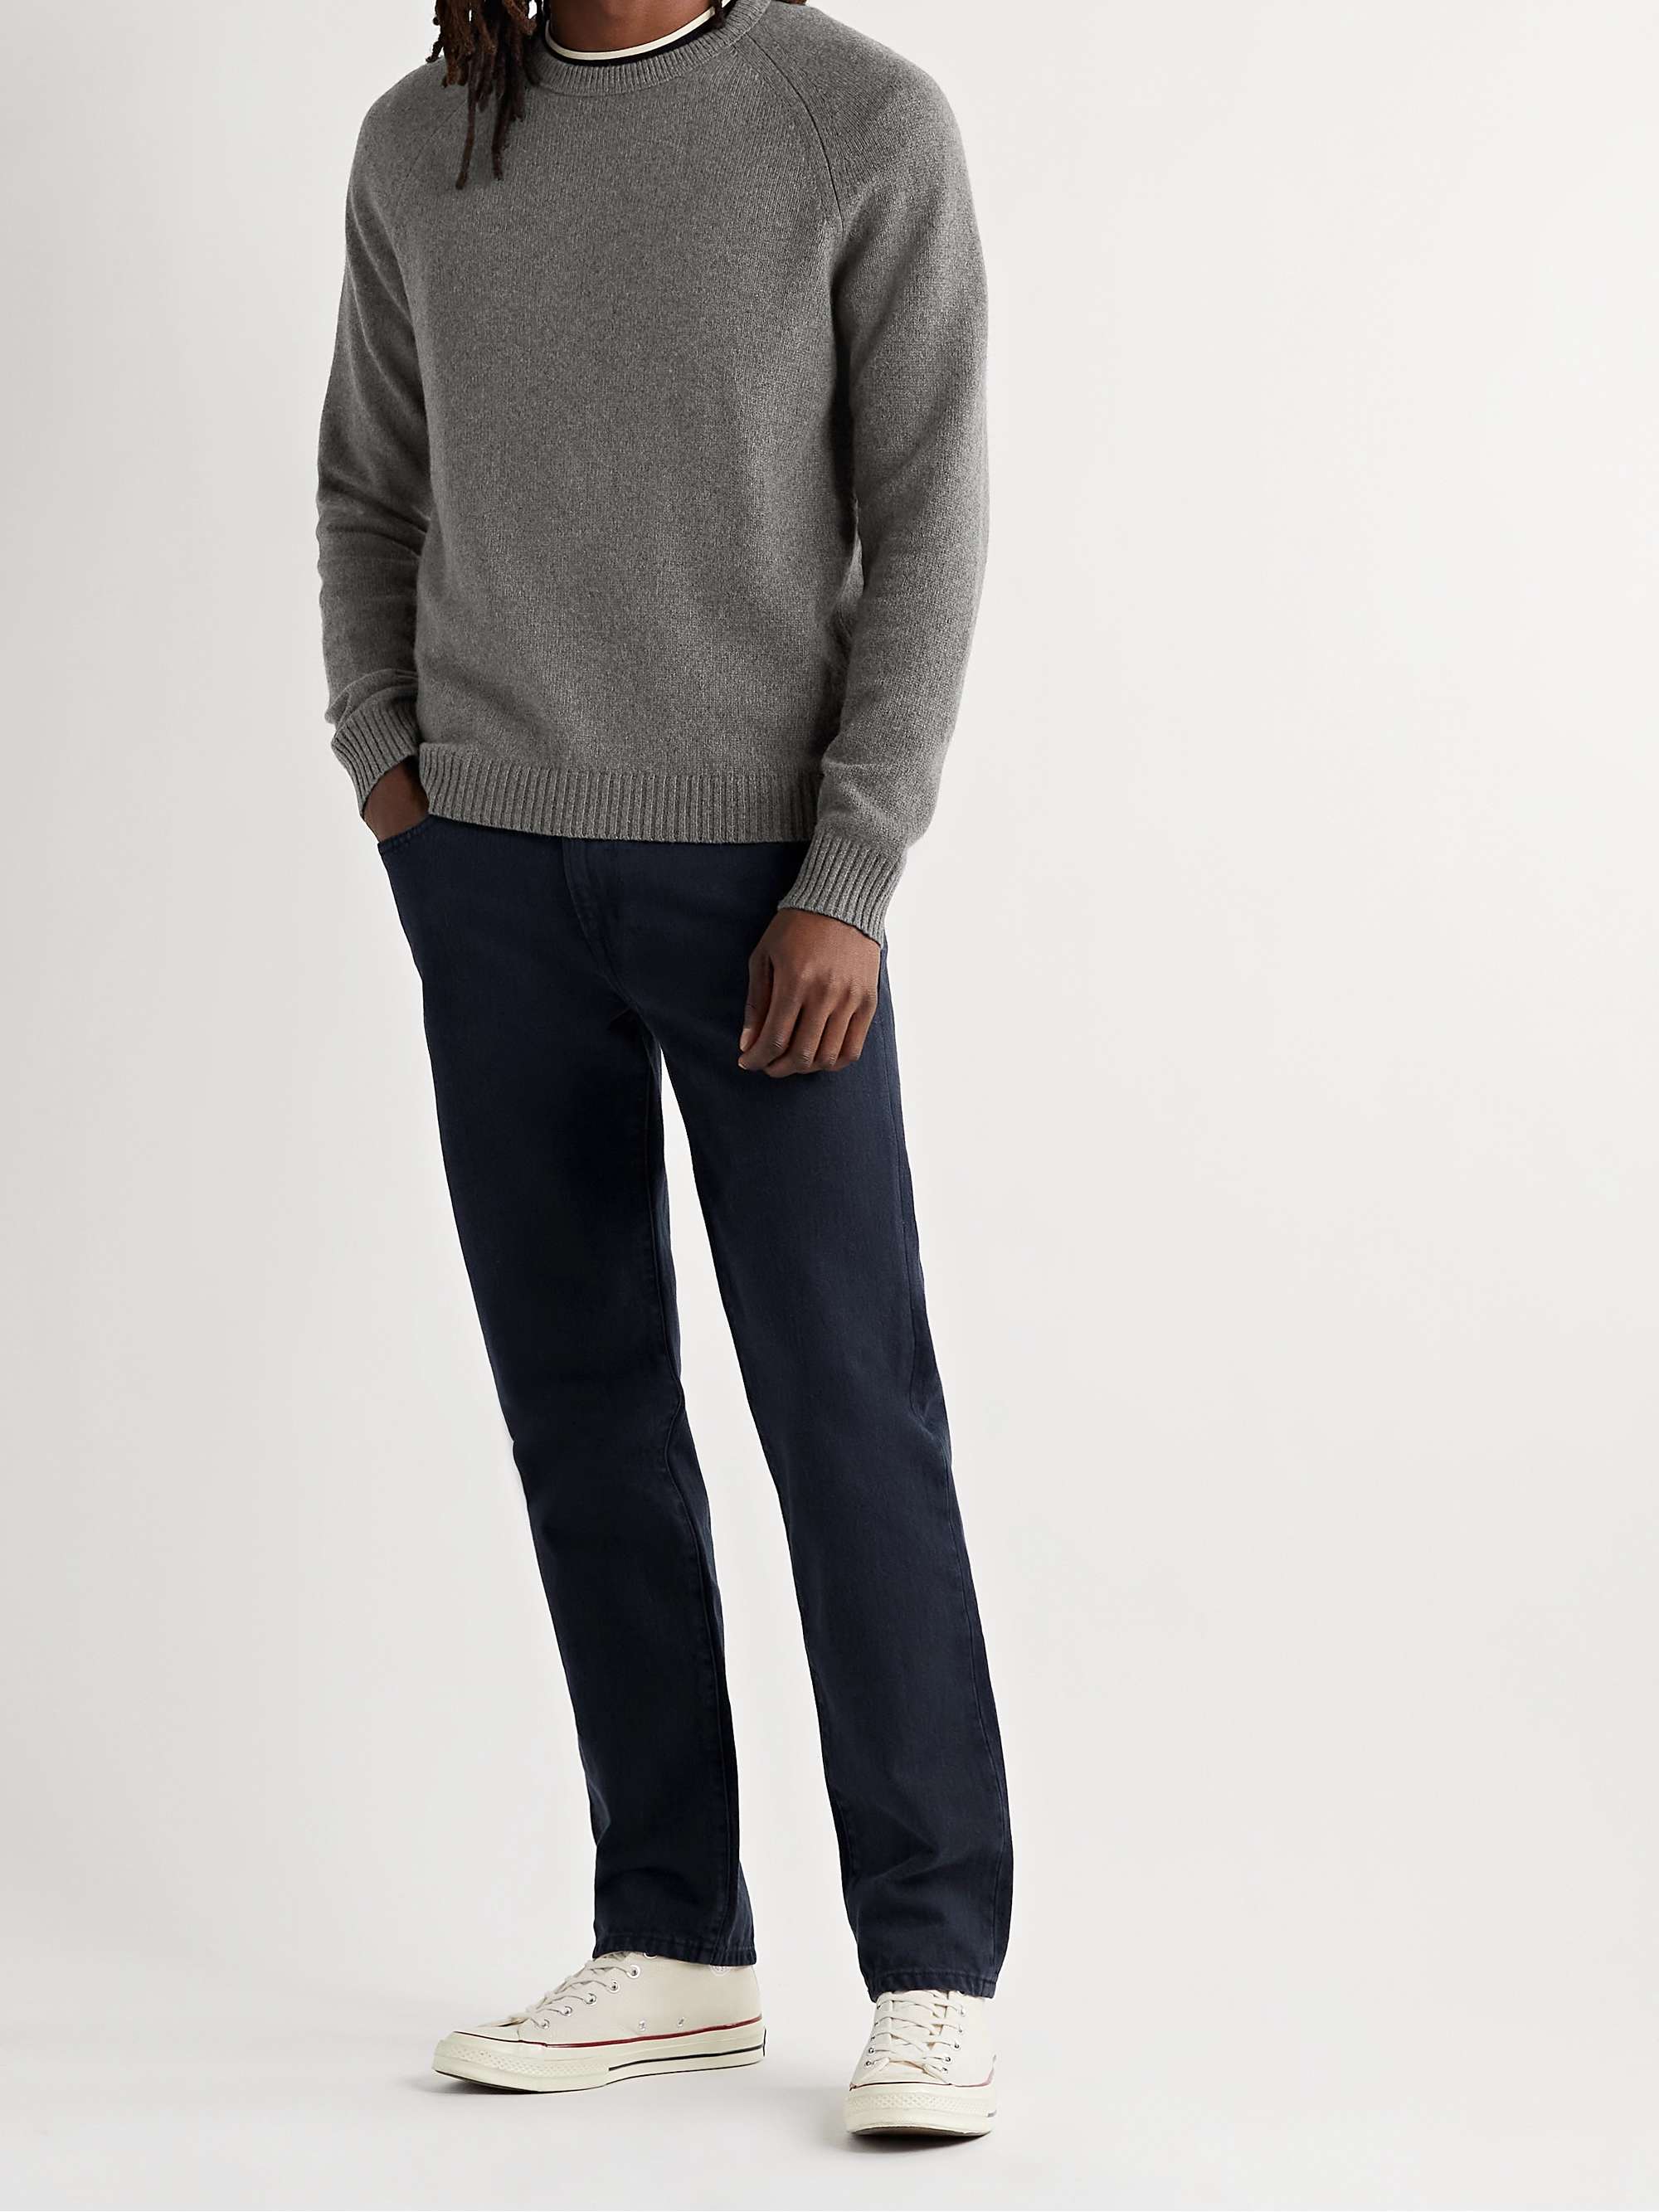 OUTERKNOWN Recycled Cashmere and Merino Wool-Blend Sweater